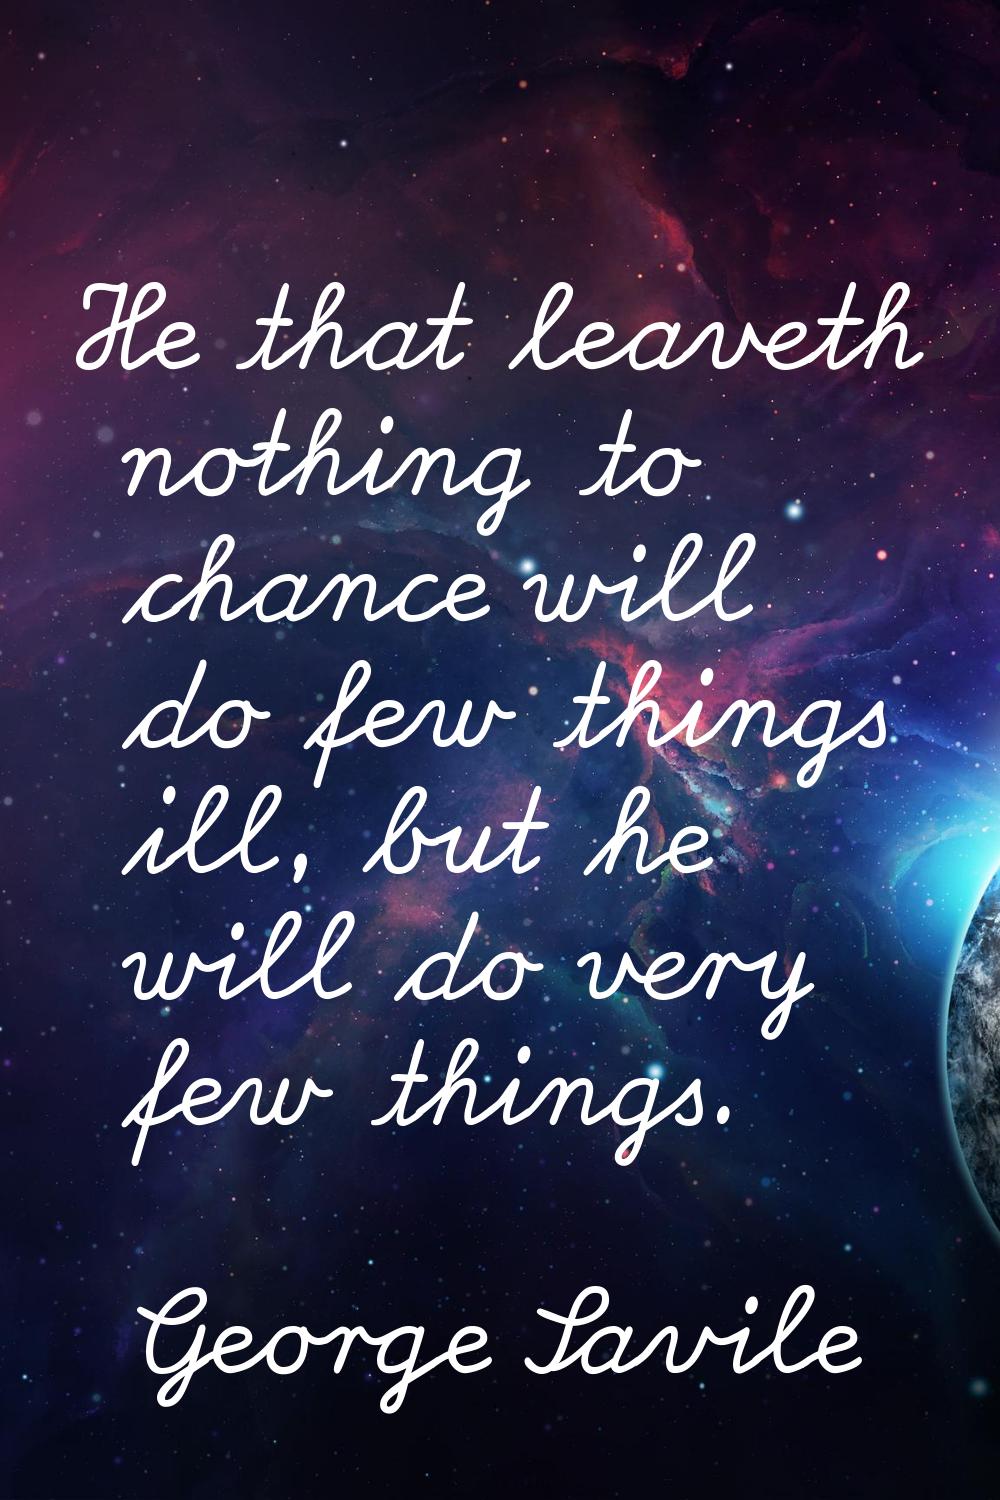 He that leaveth nothing to chance will do few things ill, but he will do very few things.